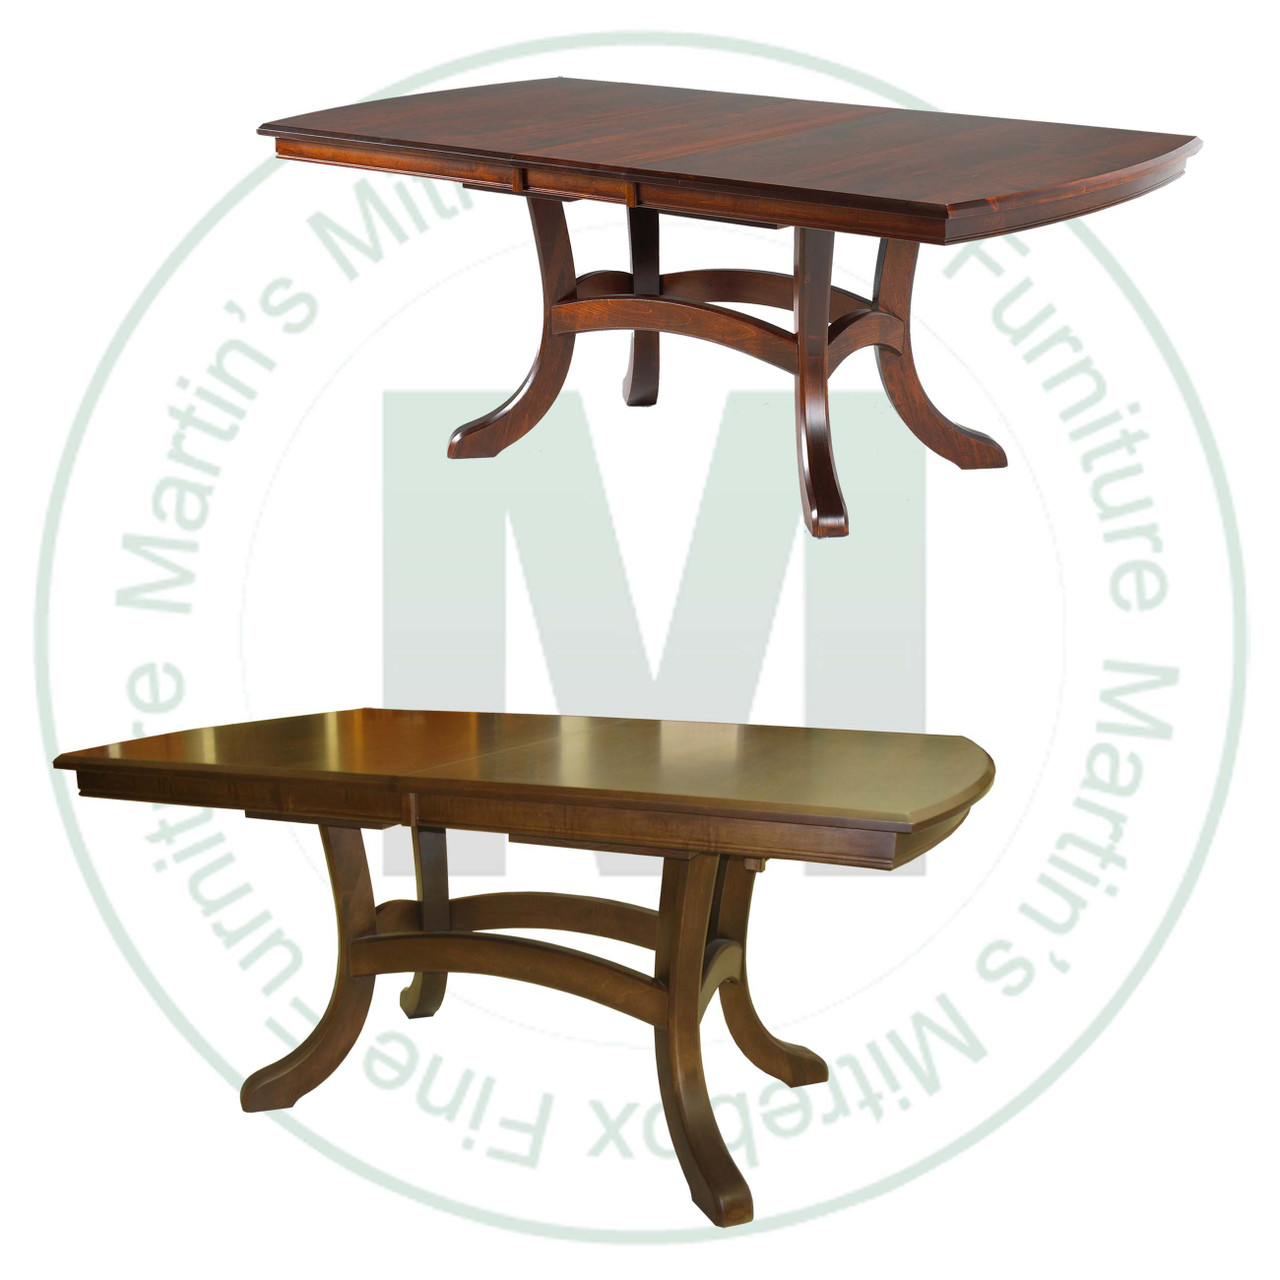 Oak Jordan Double Pedestal Table 48''D x 96''W x 30''H With 2 - 12'' Leaves. Table Has 1'' Thick Top